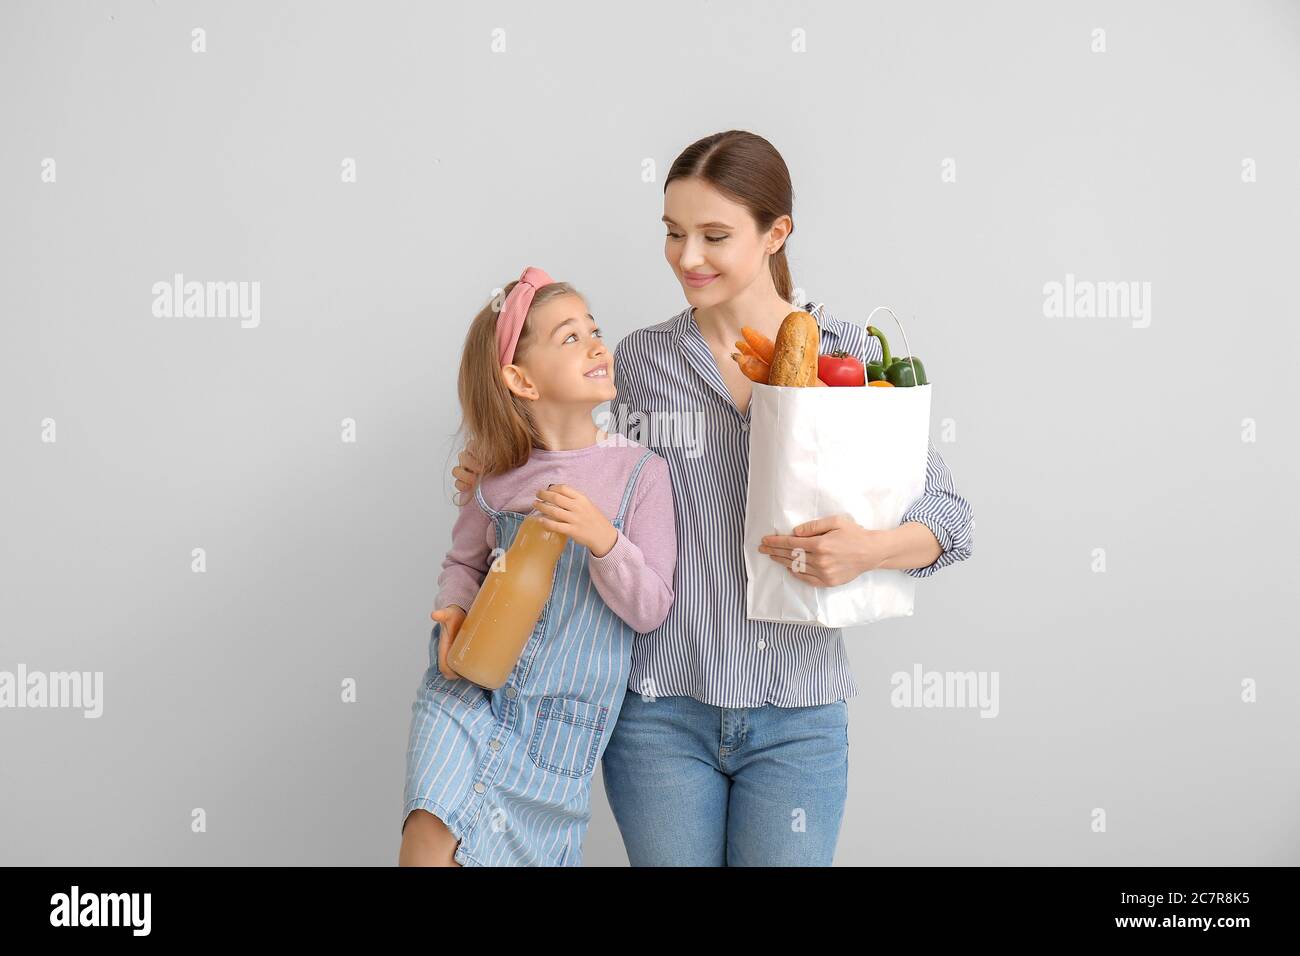 Mother and daughter with food in bag on light background Stock Photo